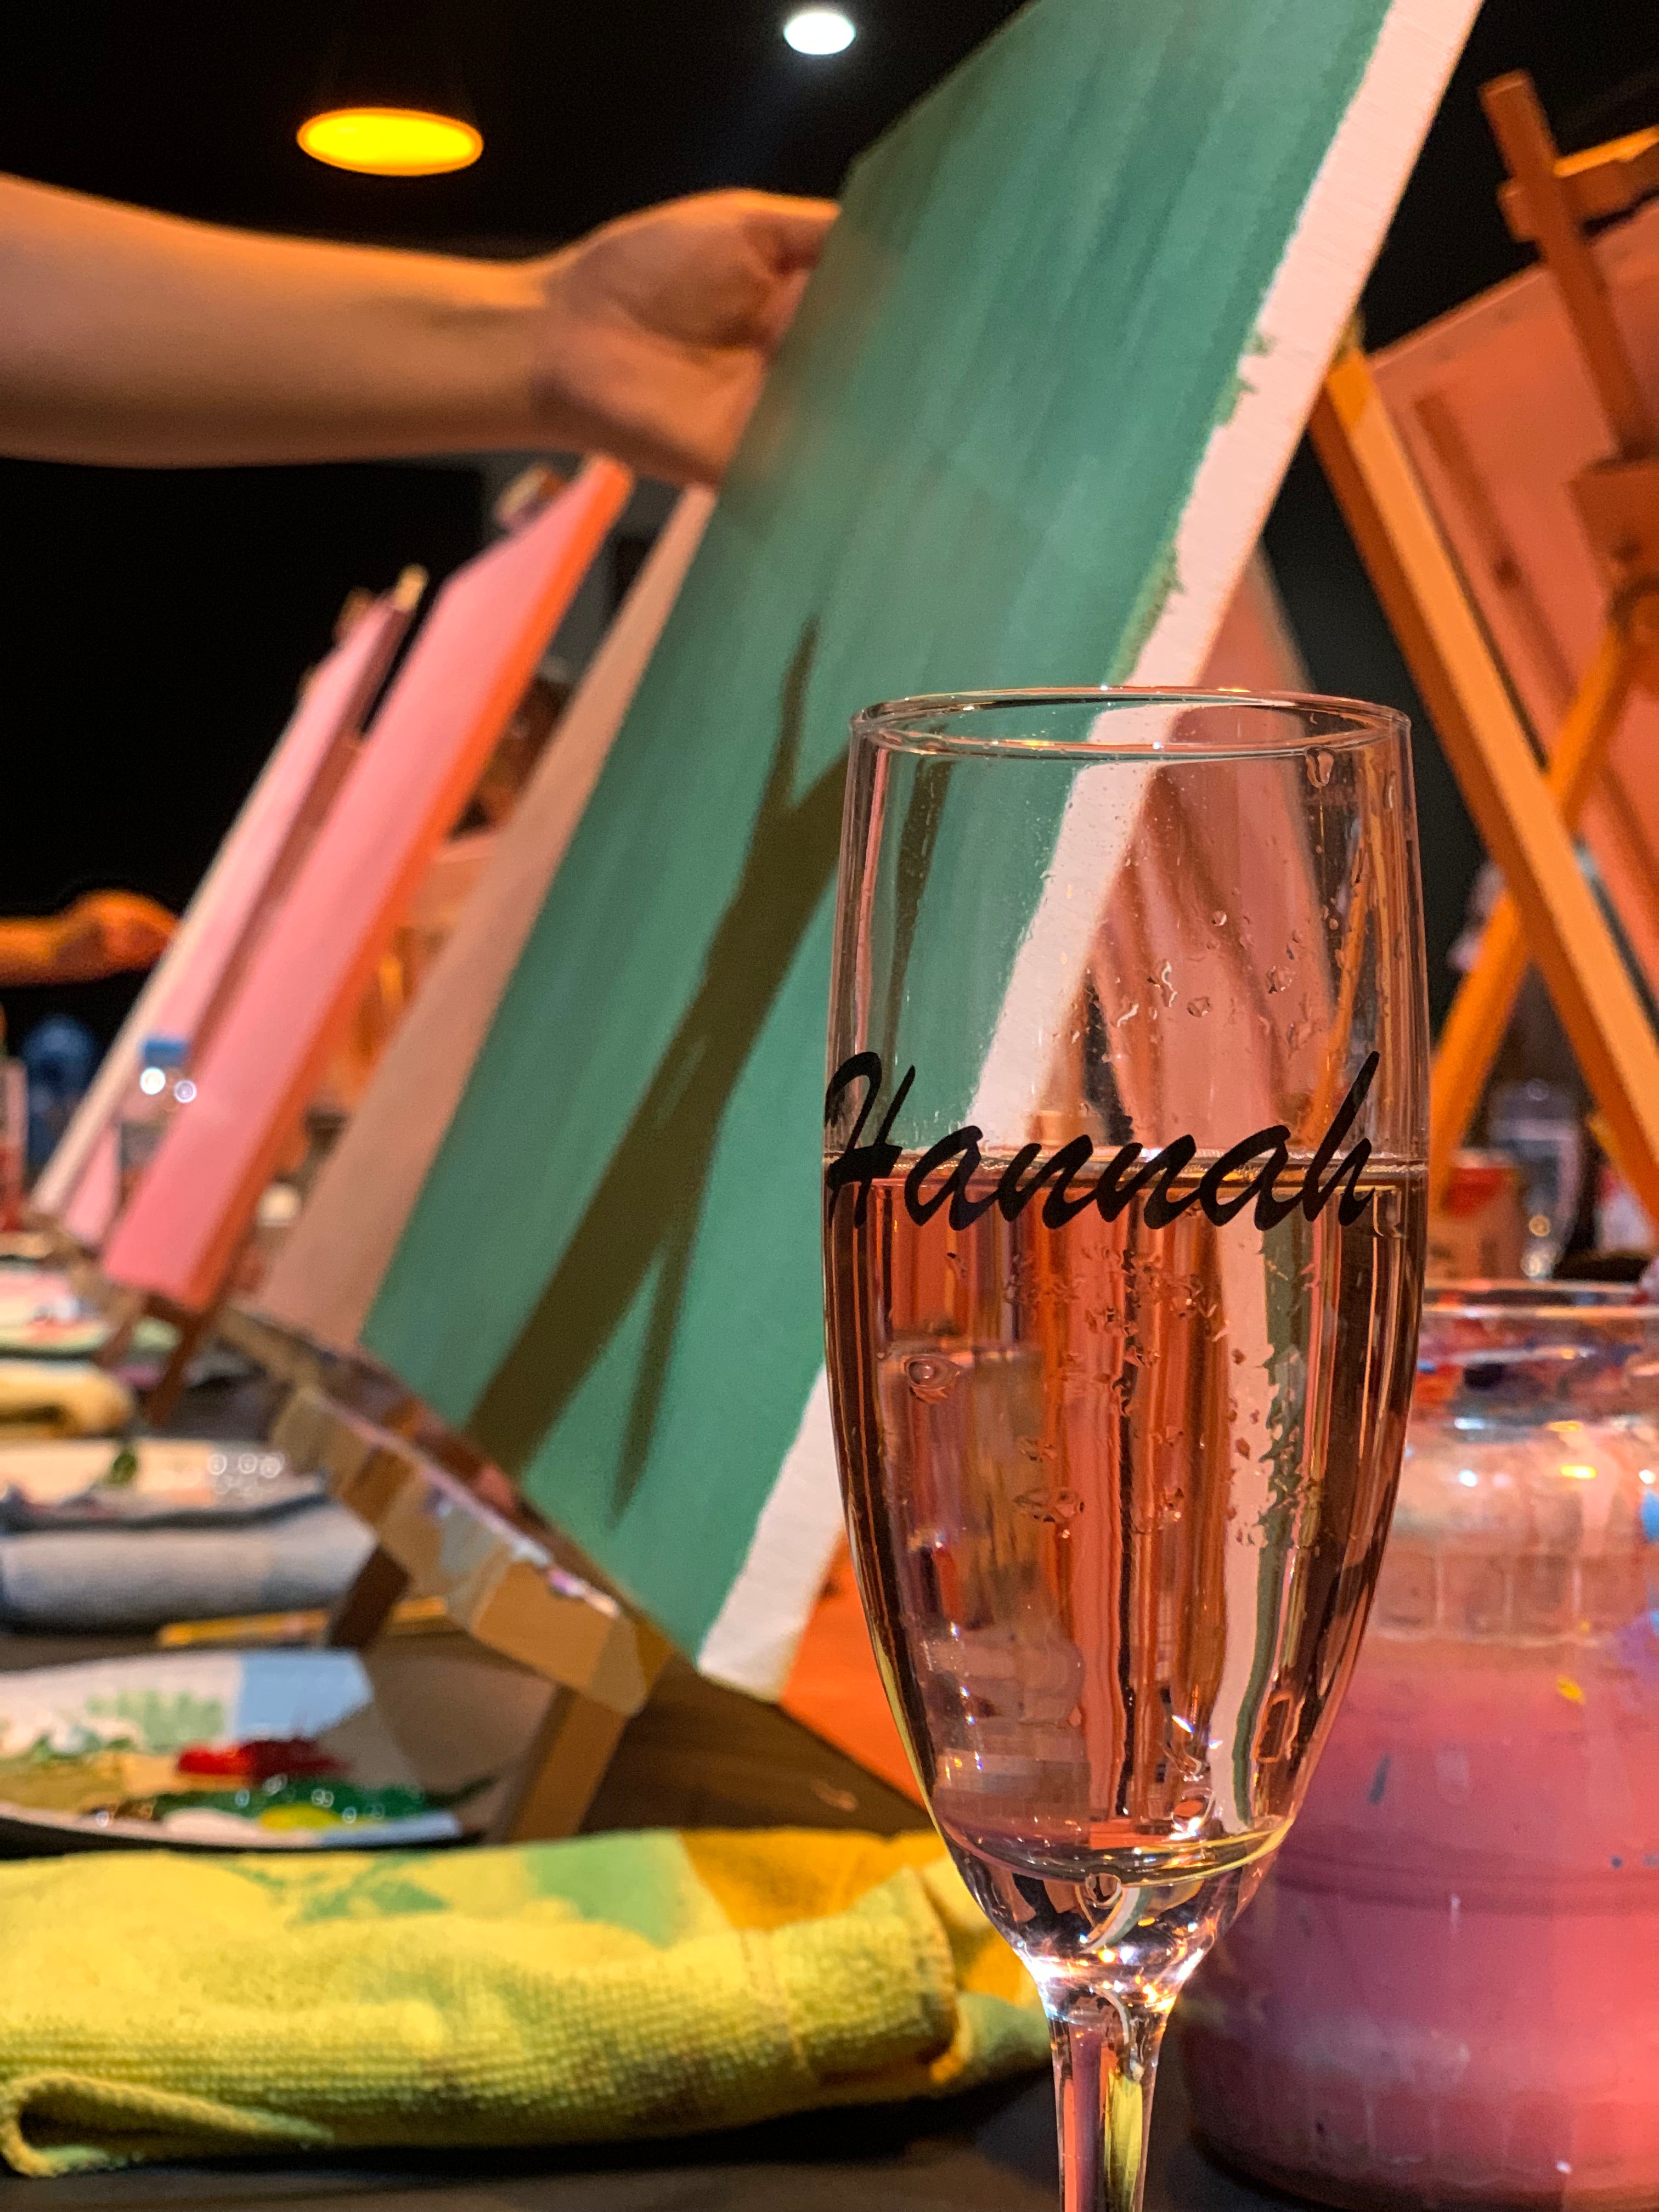 Hunchy Paint and Sip Class - Enjoy a creative afternoon of painting, sip and wood fired pizza in a stunning rural setting.